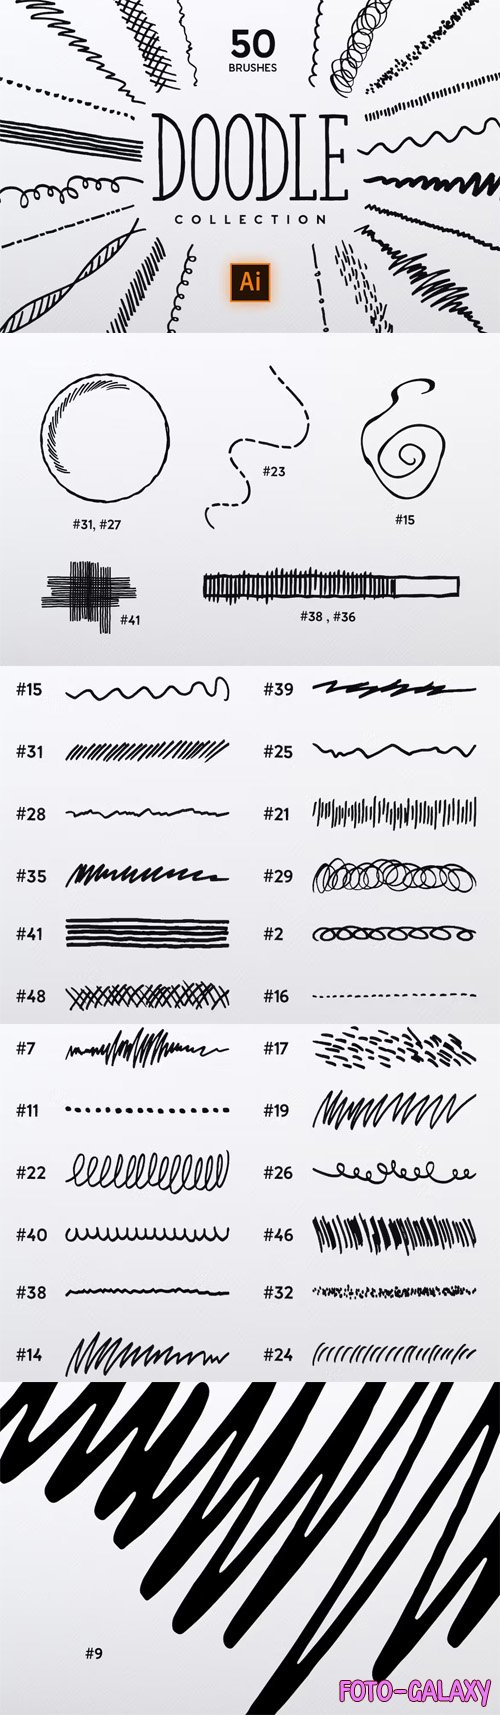 Doodle Brushes Collection for Illustrator